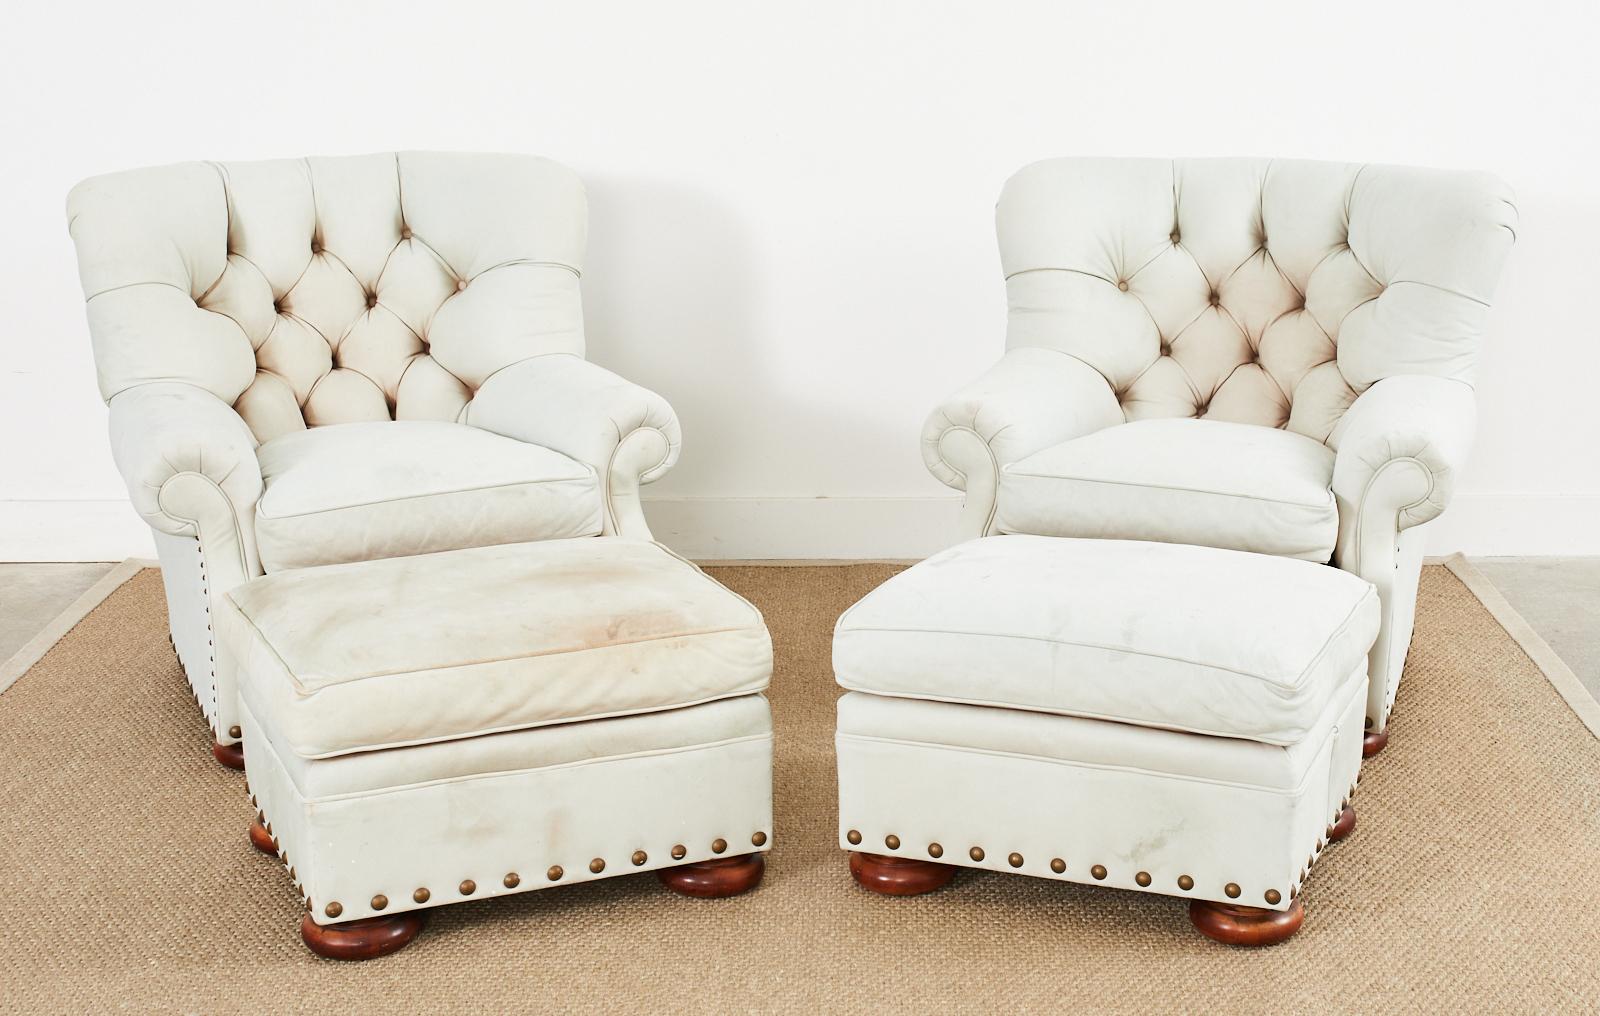 Beautifully weathered pair of leather writers chairs or wingback chairs made in the style and manner of Ralph Lauren. The large wing chairs are crafted from thick, glove-soft tufted leather hides with a desirable worn patina. The finish is faded,